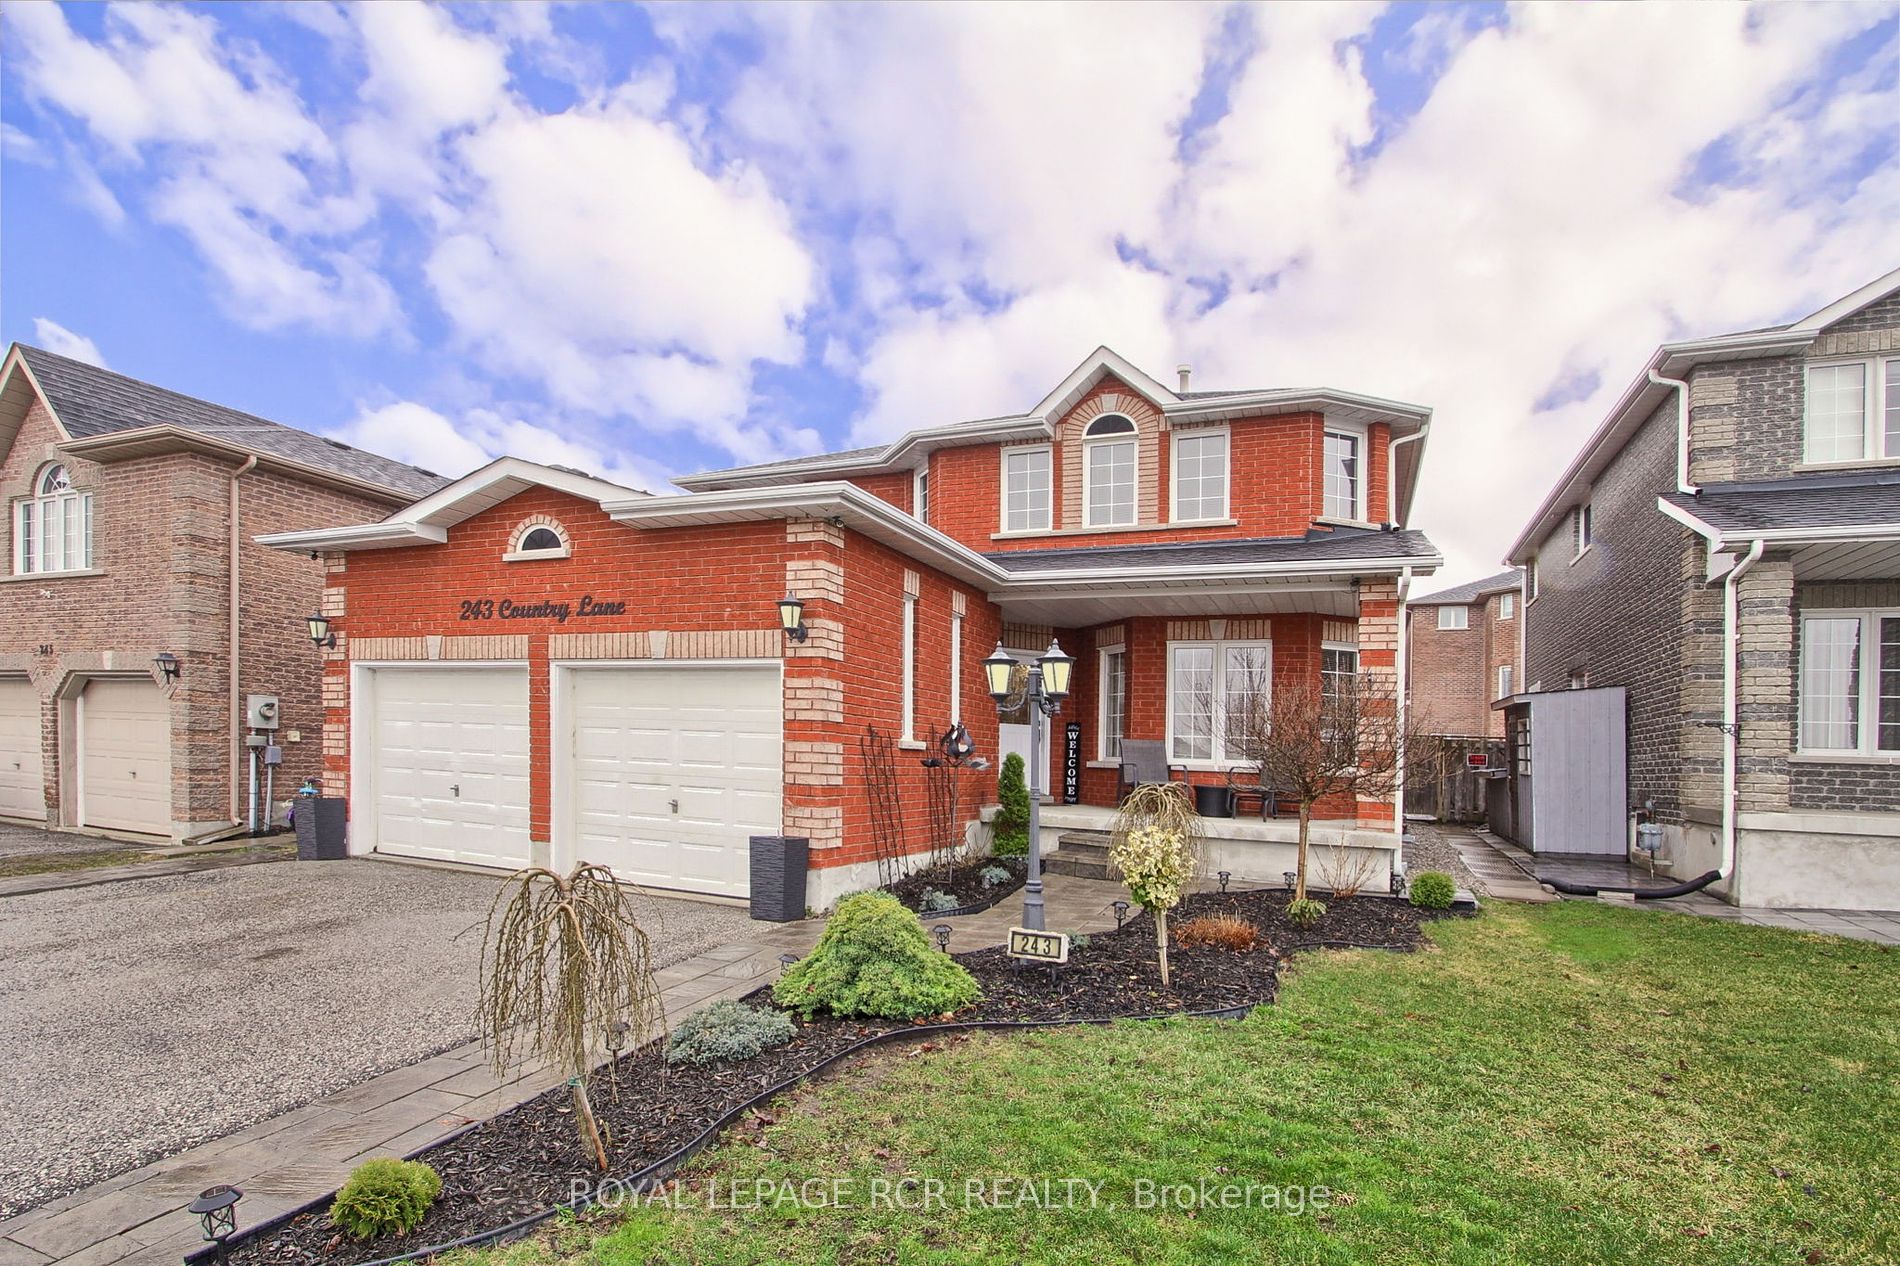 Detached house for sale at 243 Country Lane Barrie Ontario